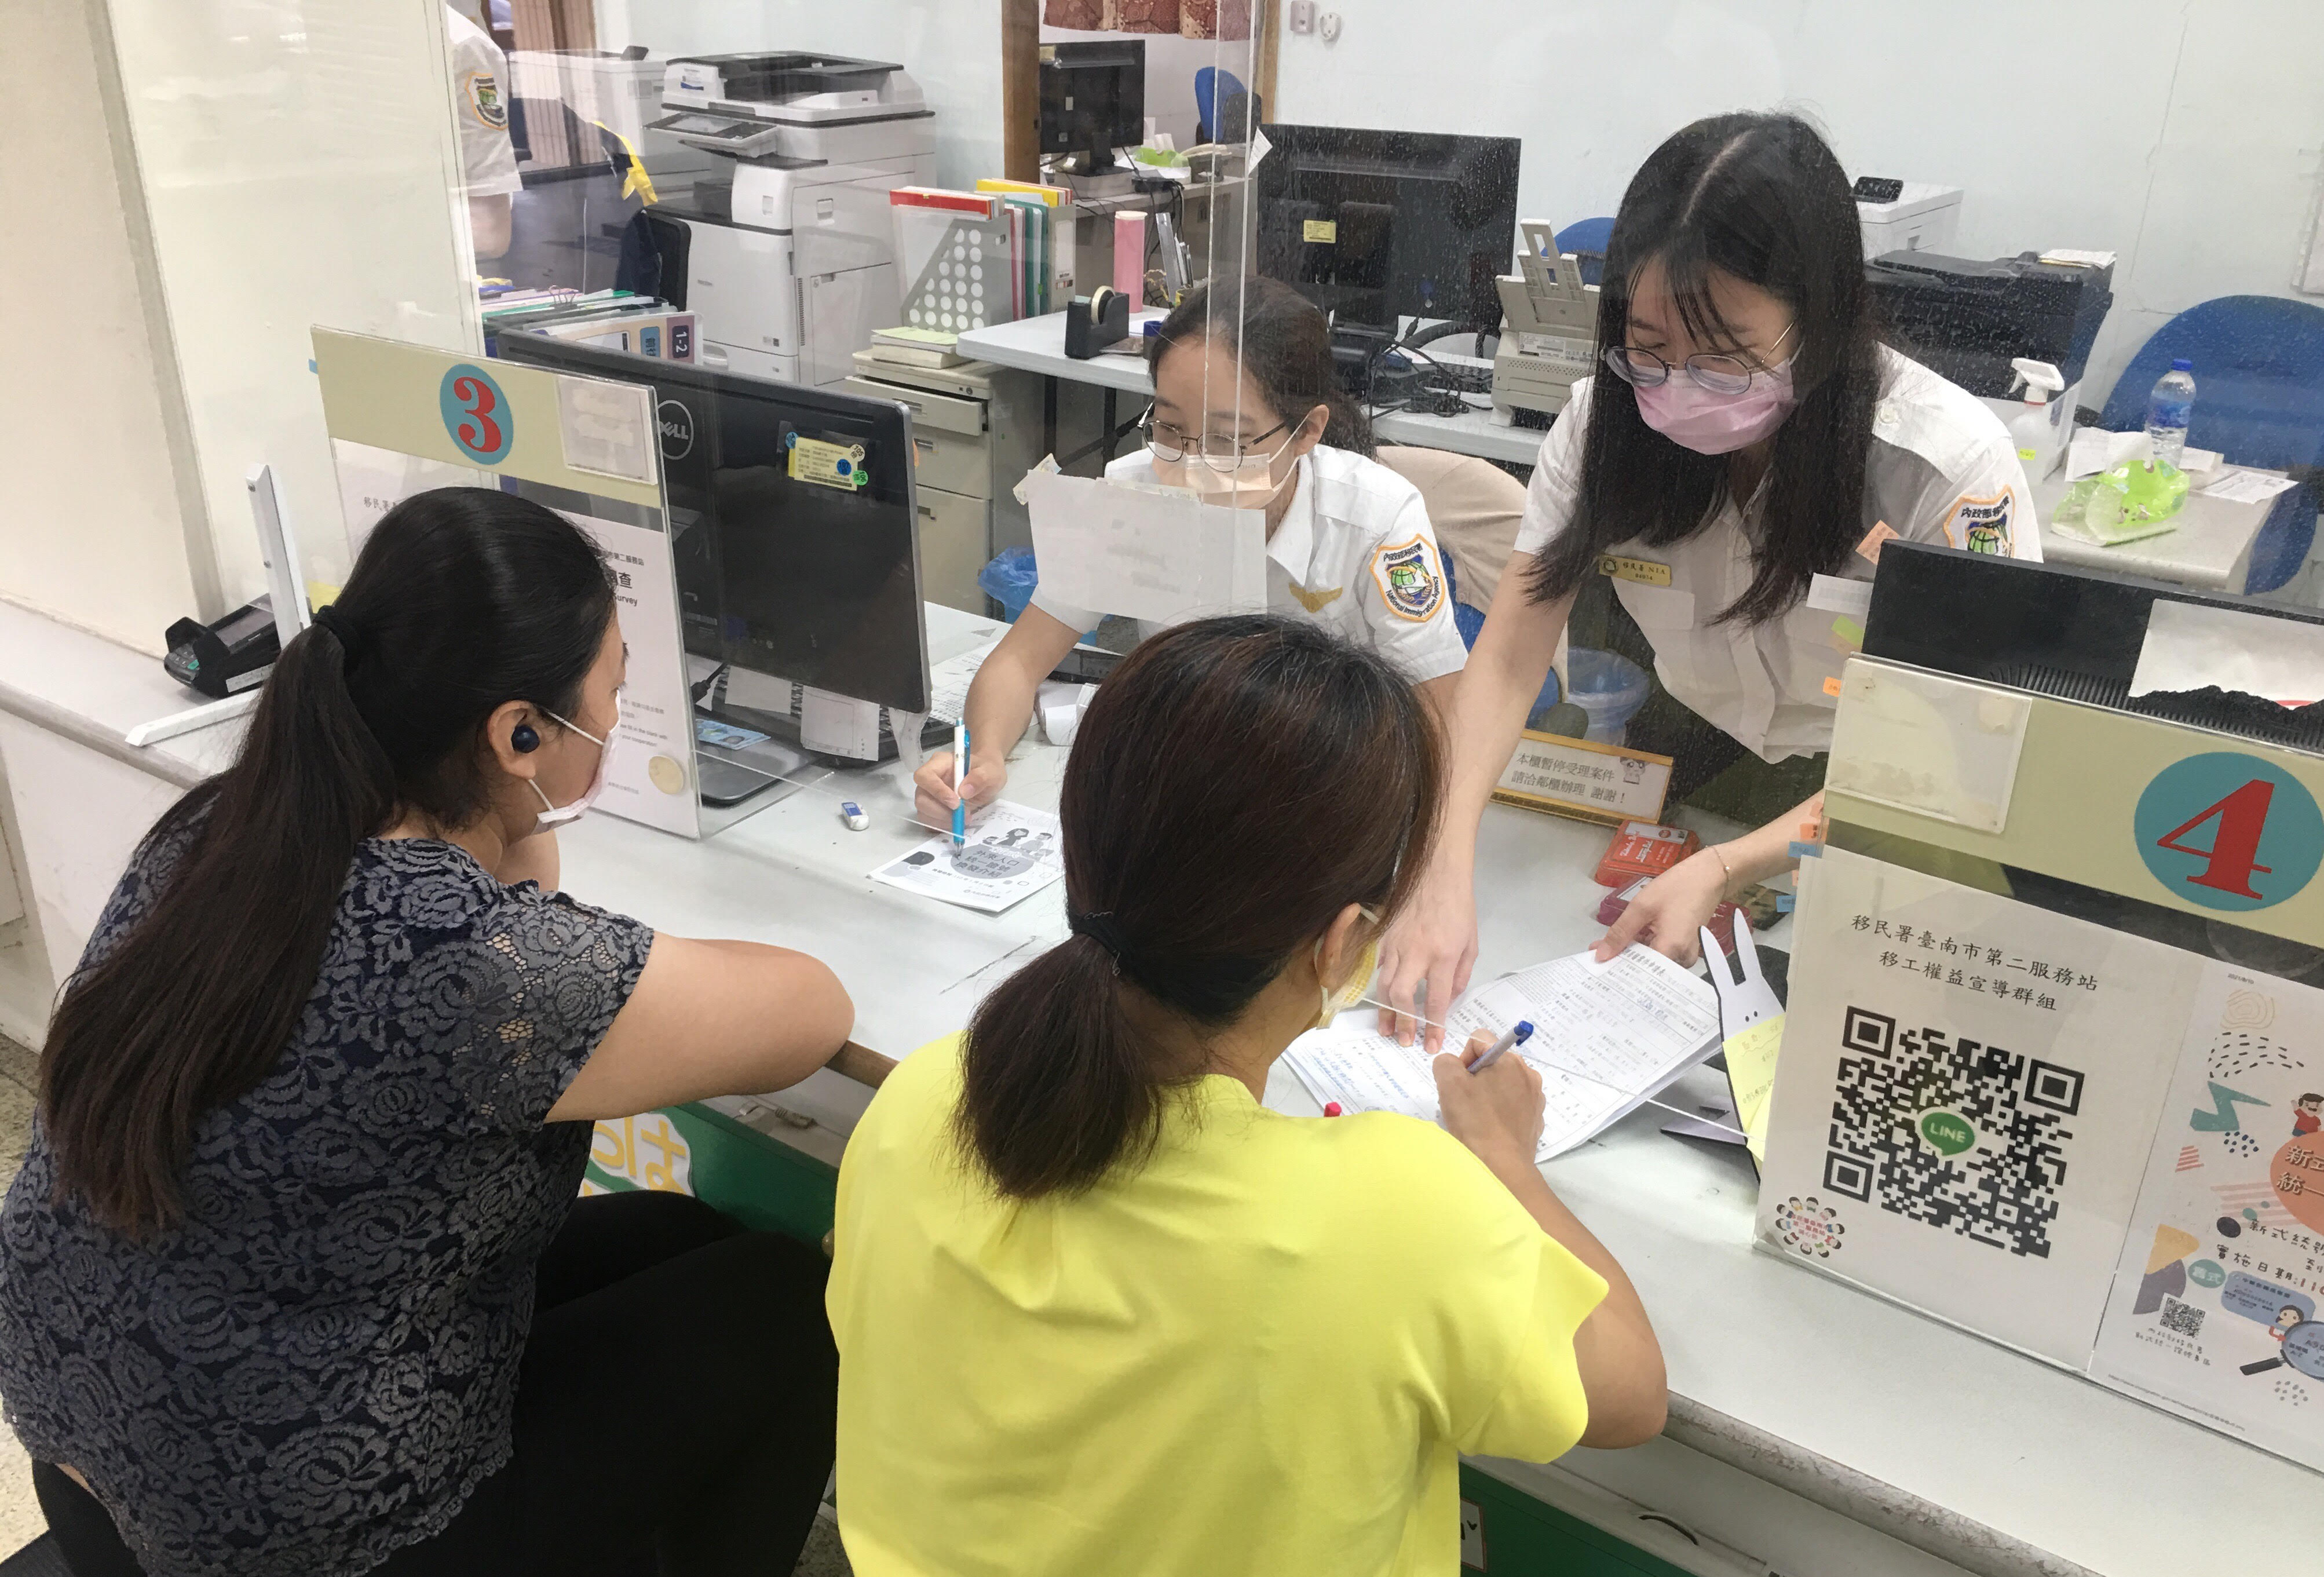 The NIA service station announced the latest regulations to new immigrants. (Photo / Provided by the NIA 2nd Tainan City Service Center)